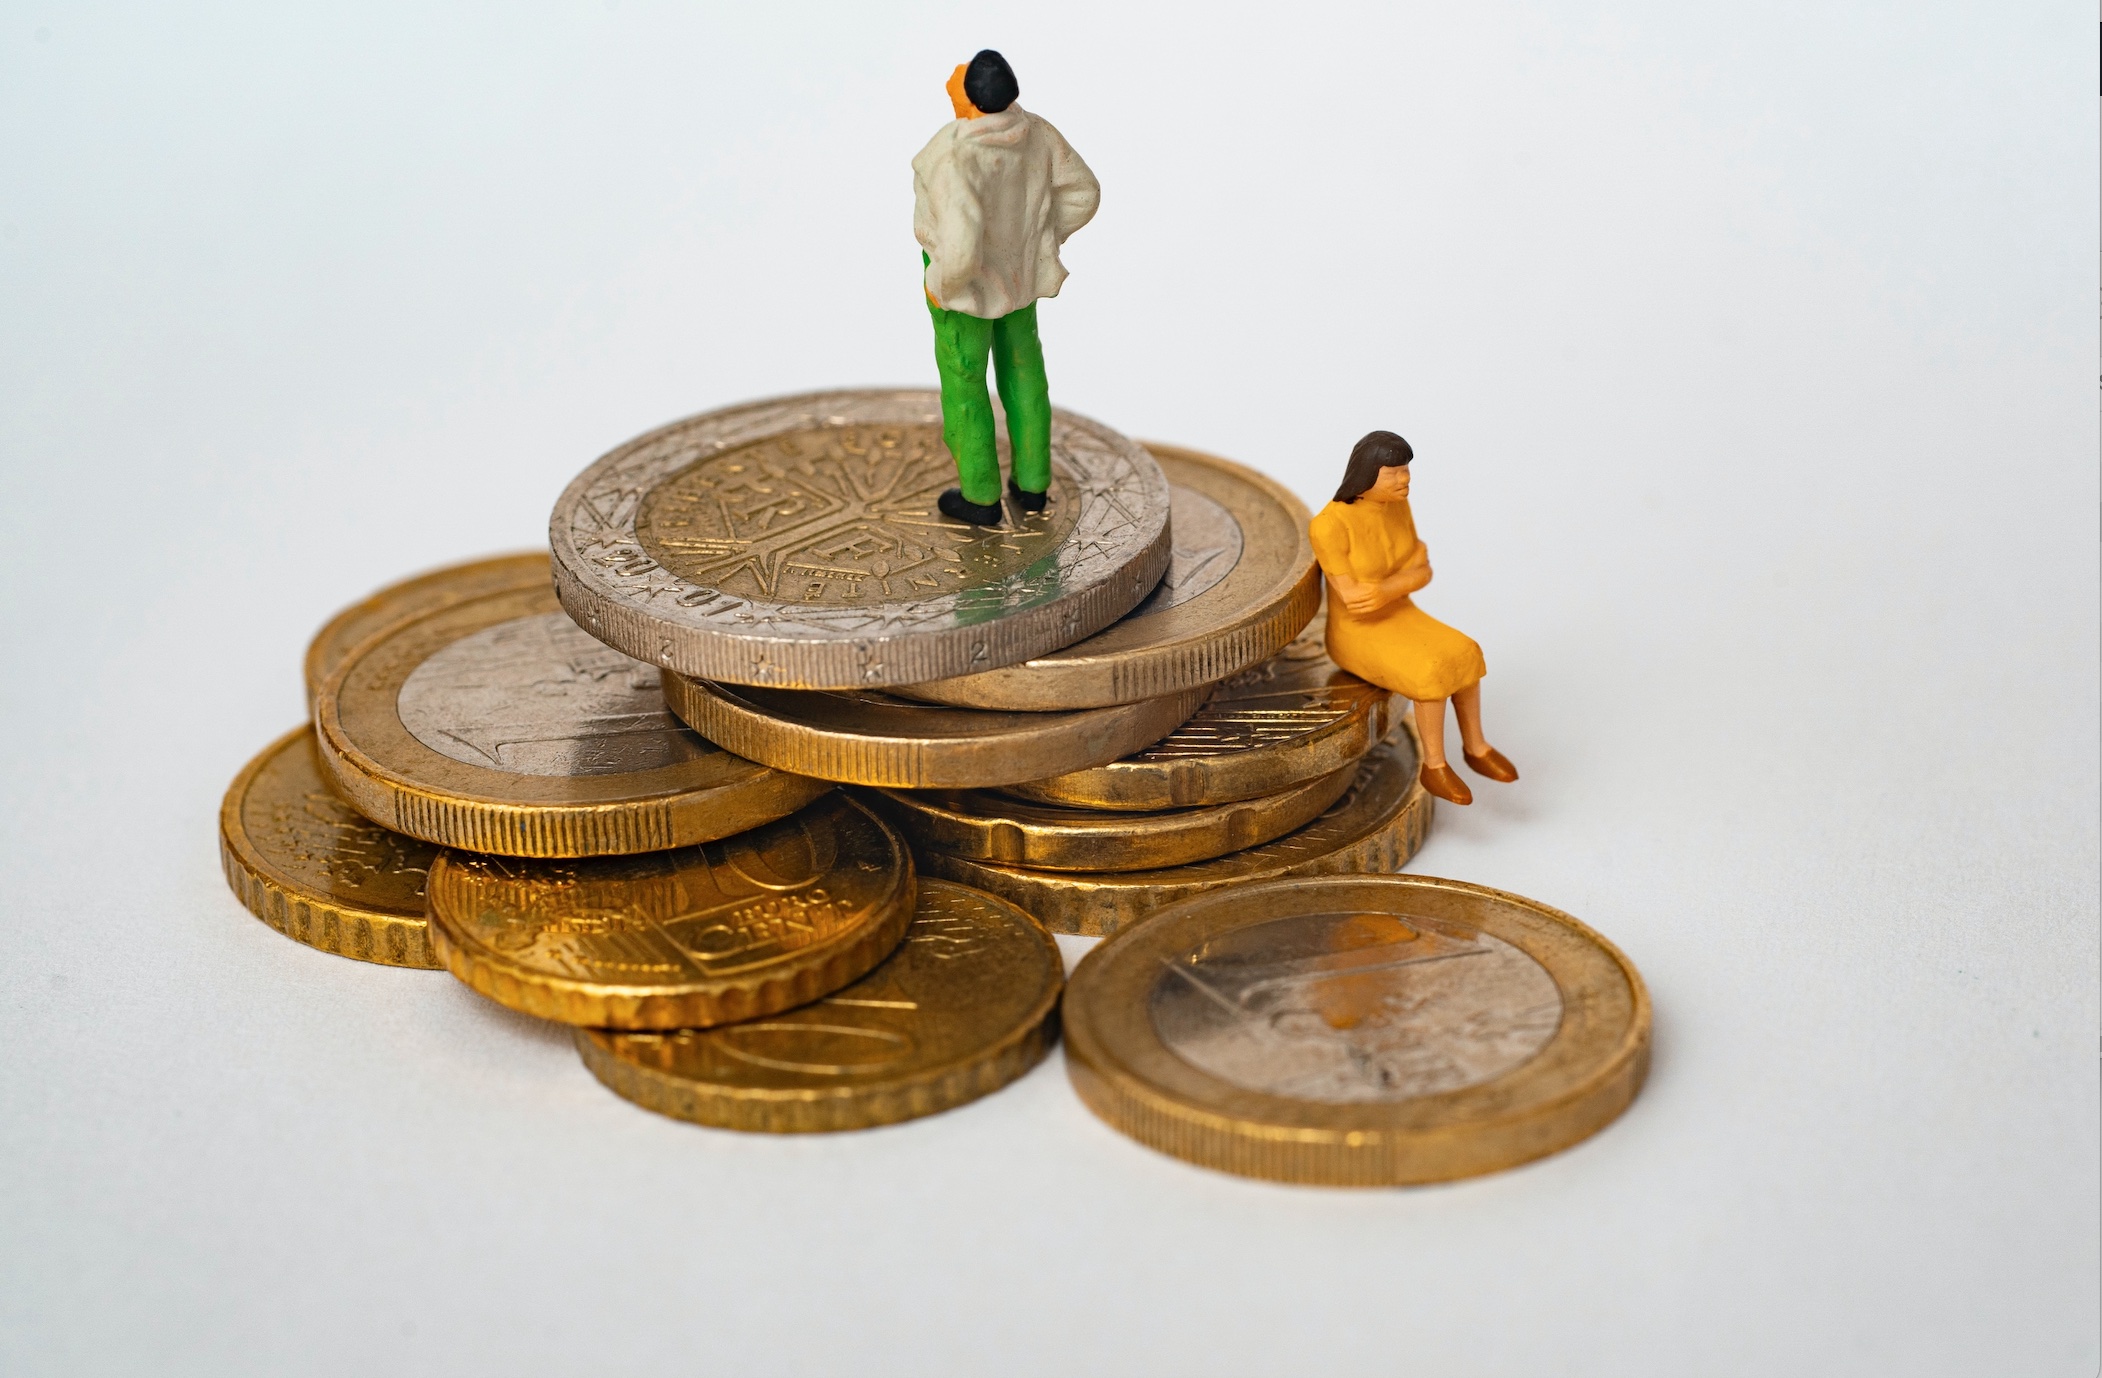 Figures posed on a stack of coins; image by Mathieu Stern, via Unsplash.com.